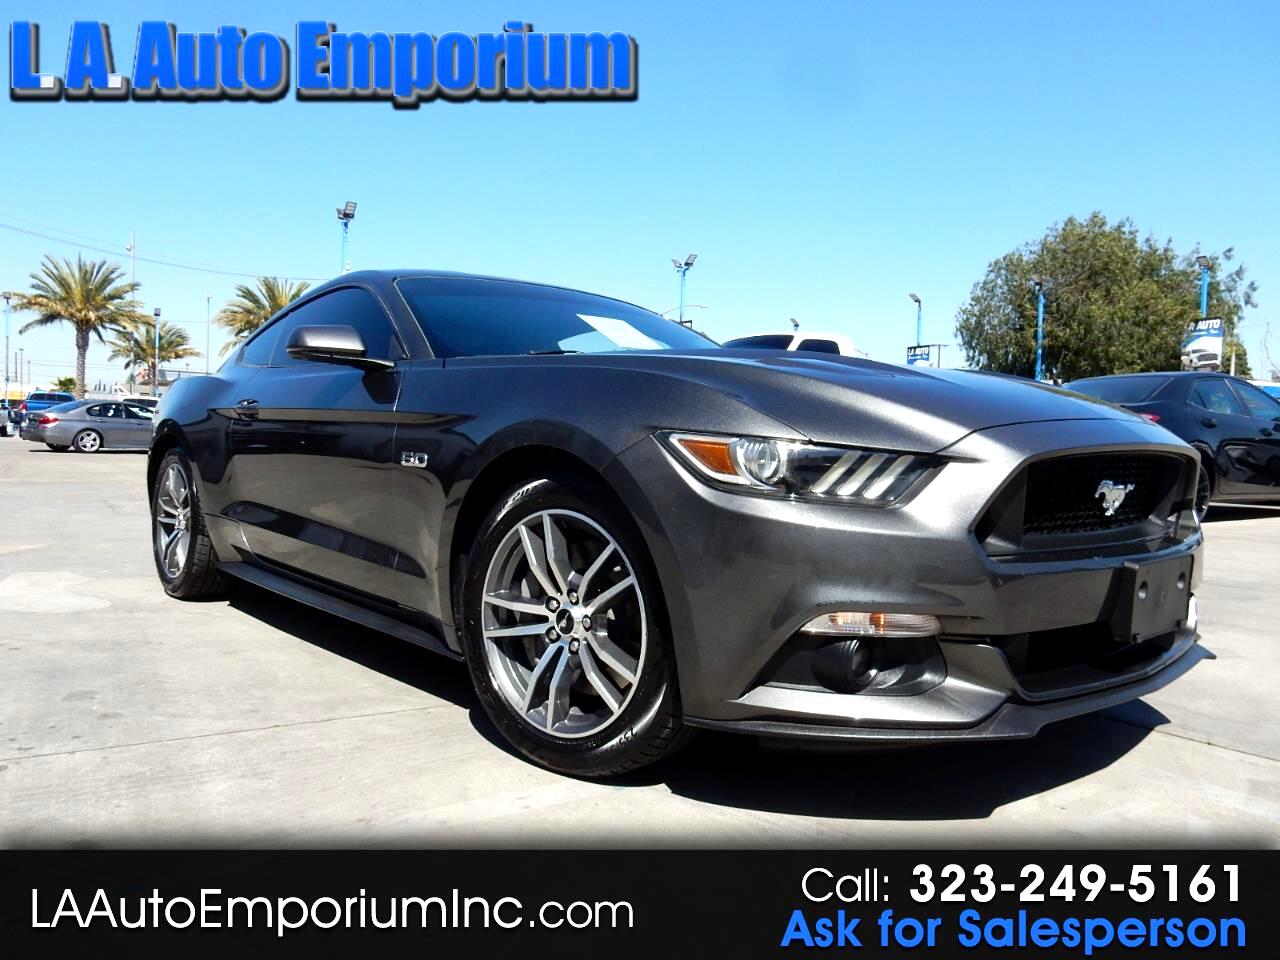 Used Ford Mustang South Gate Ca